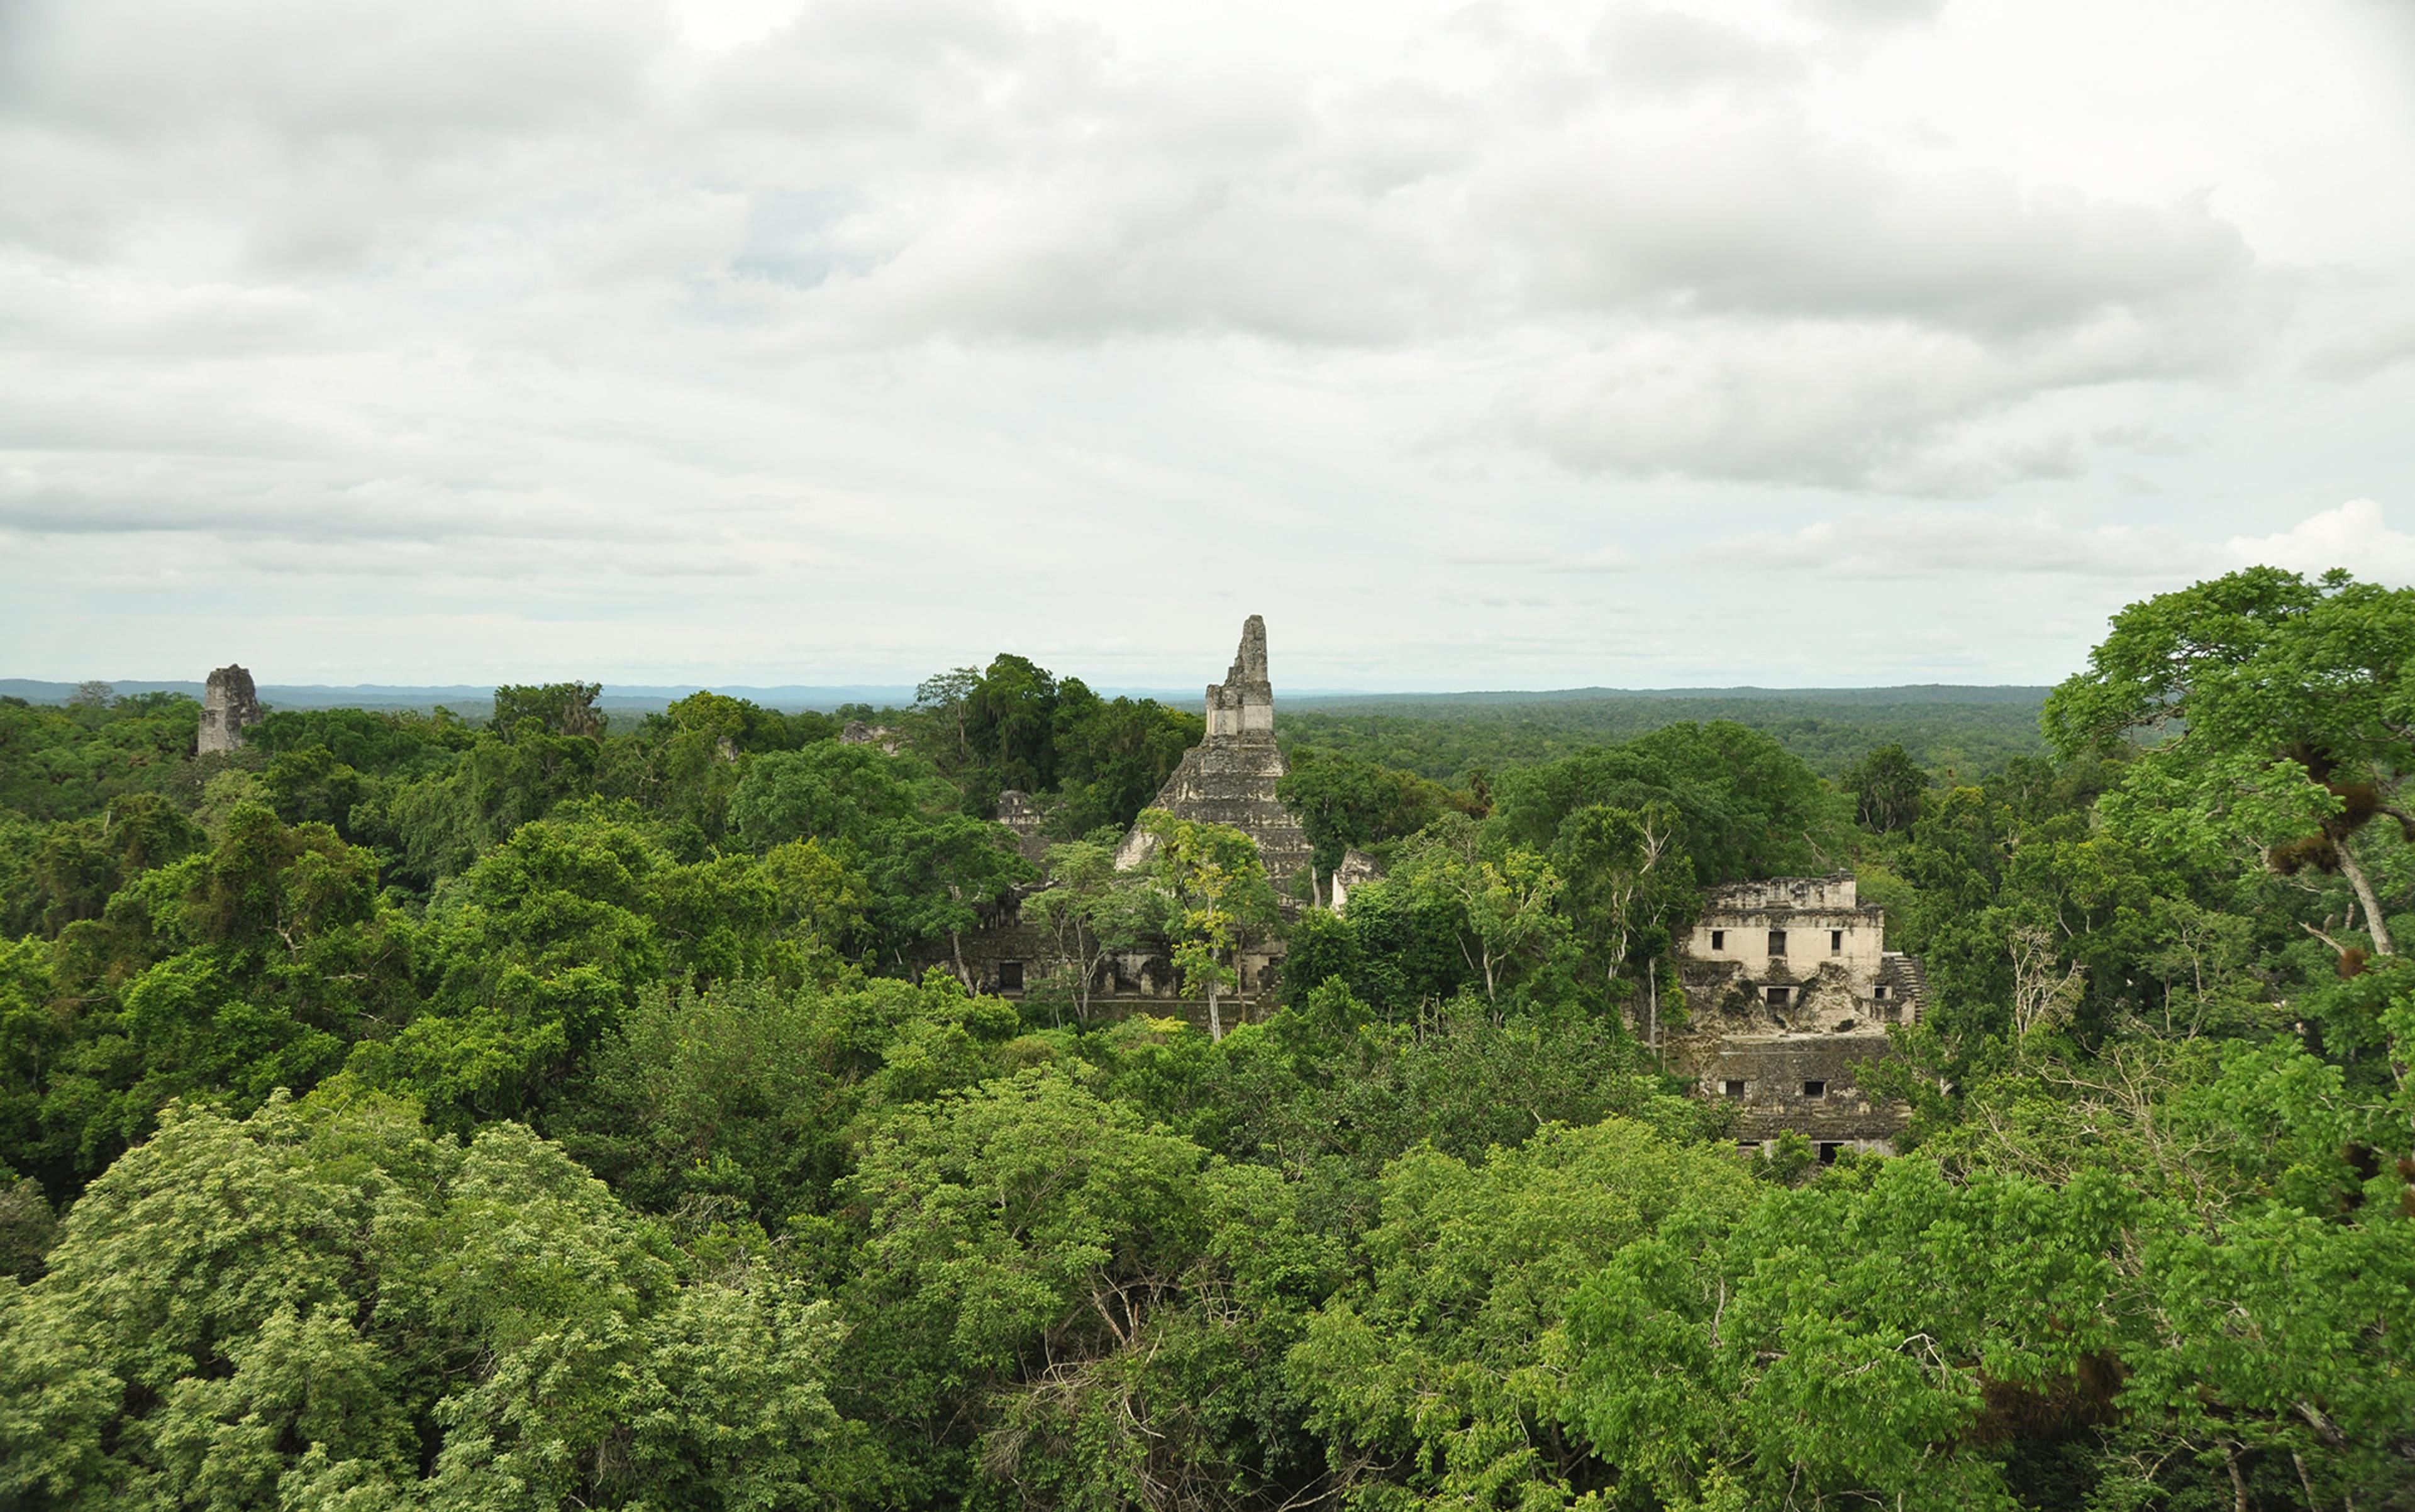 Ancient Mayan ruins, including a prominent stone pyramid, surrounded by dense green jungle under a cloudy sky.